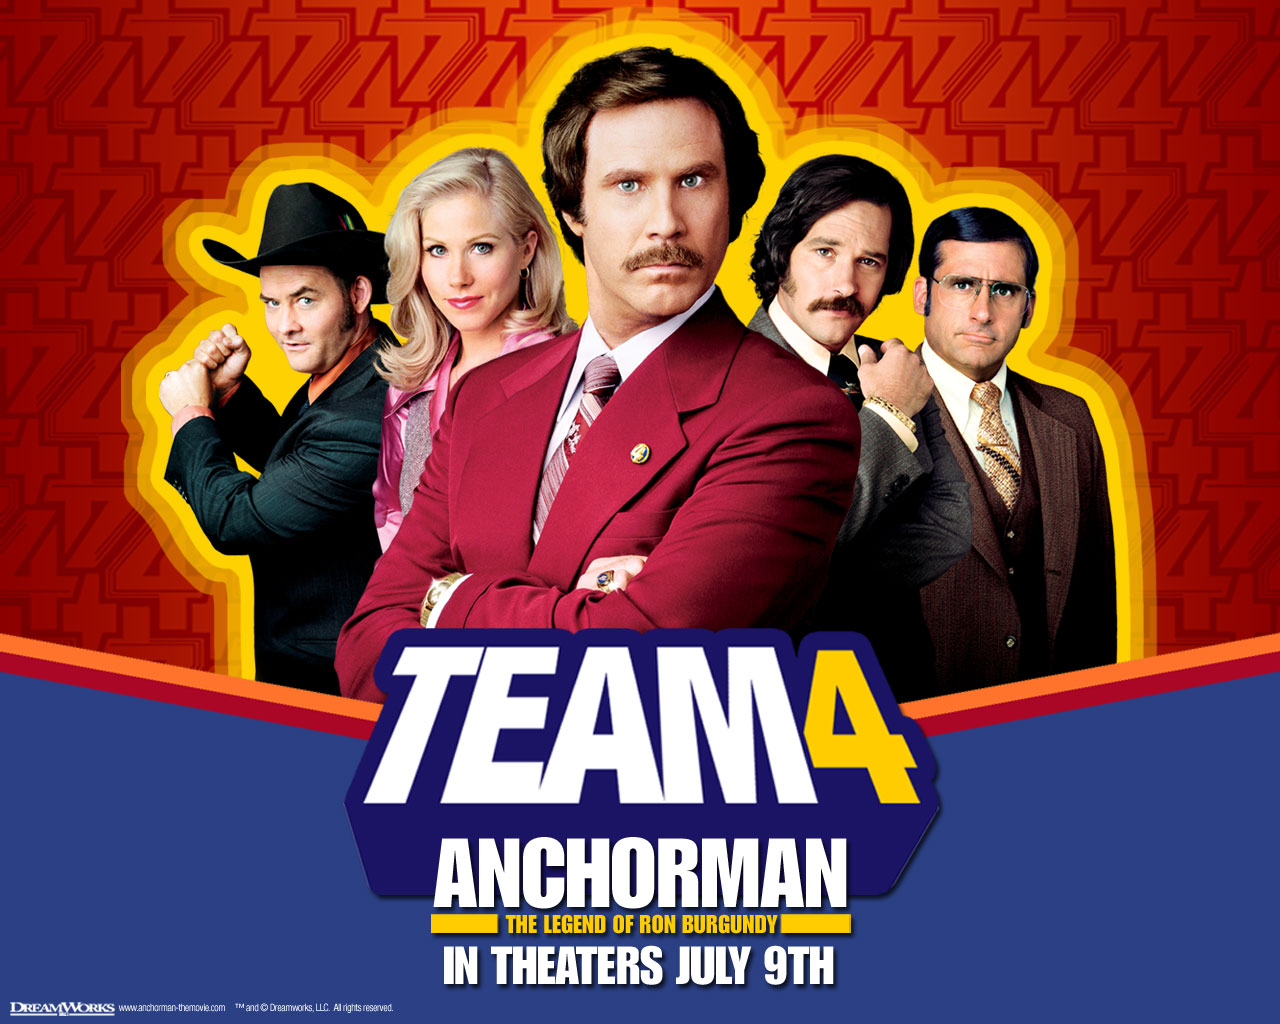 Anchorman: The Legend Of Ron Burgundy Backgrounds, Compatible - PC, Mobile, Gadgets| 1280x1024 px